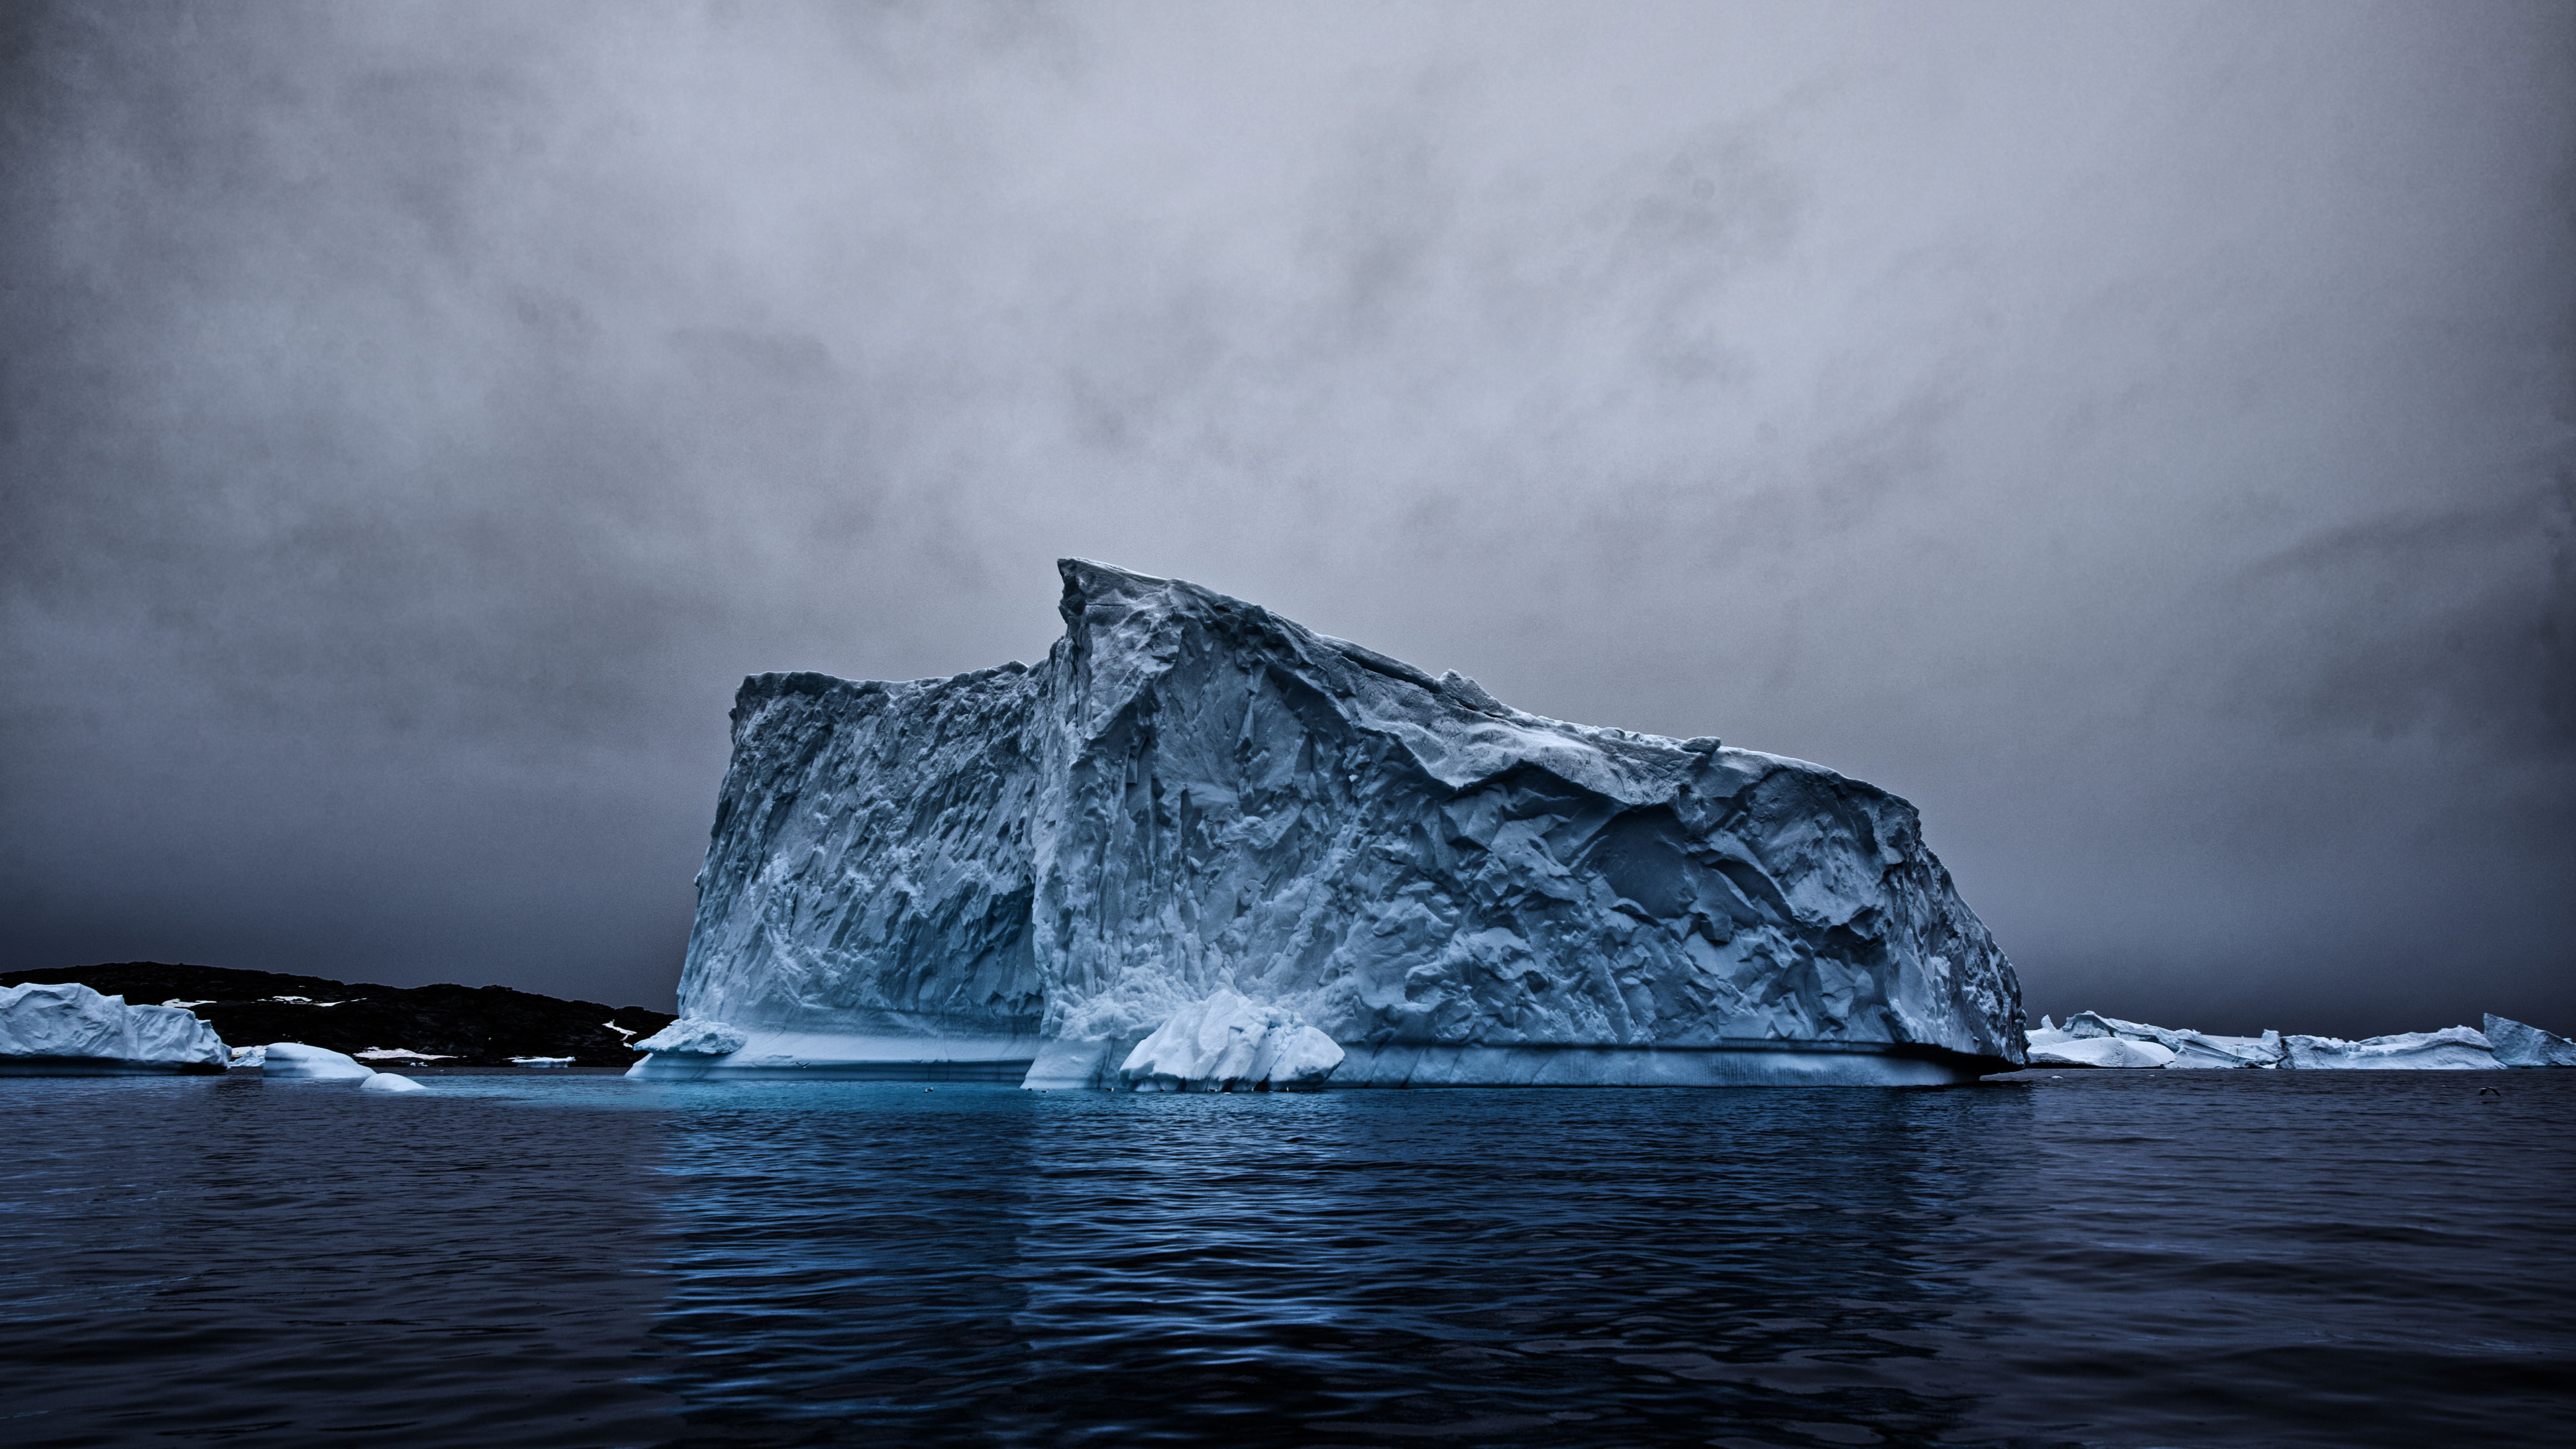 Greenland: Iceberg, Located at the east of the Canadian Arctic Archipelago. 3840x2160 4K Wallpaper.